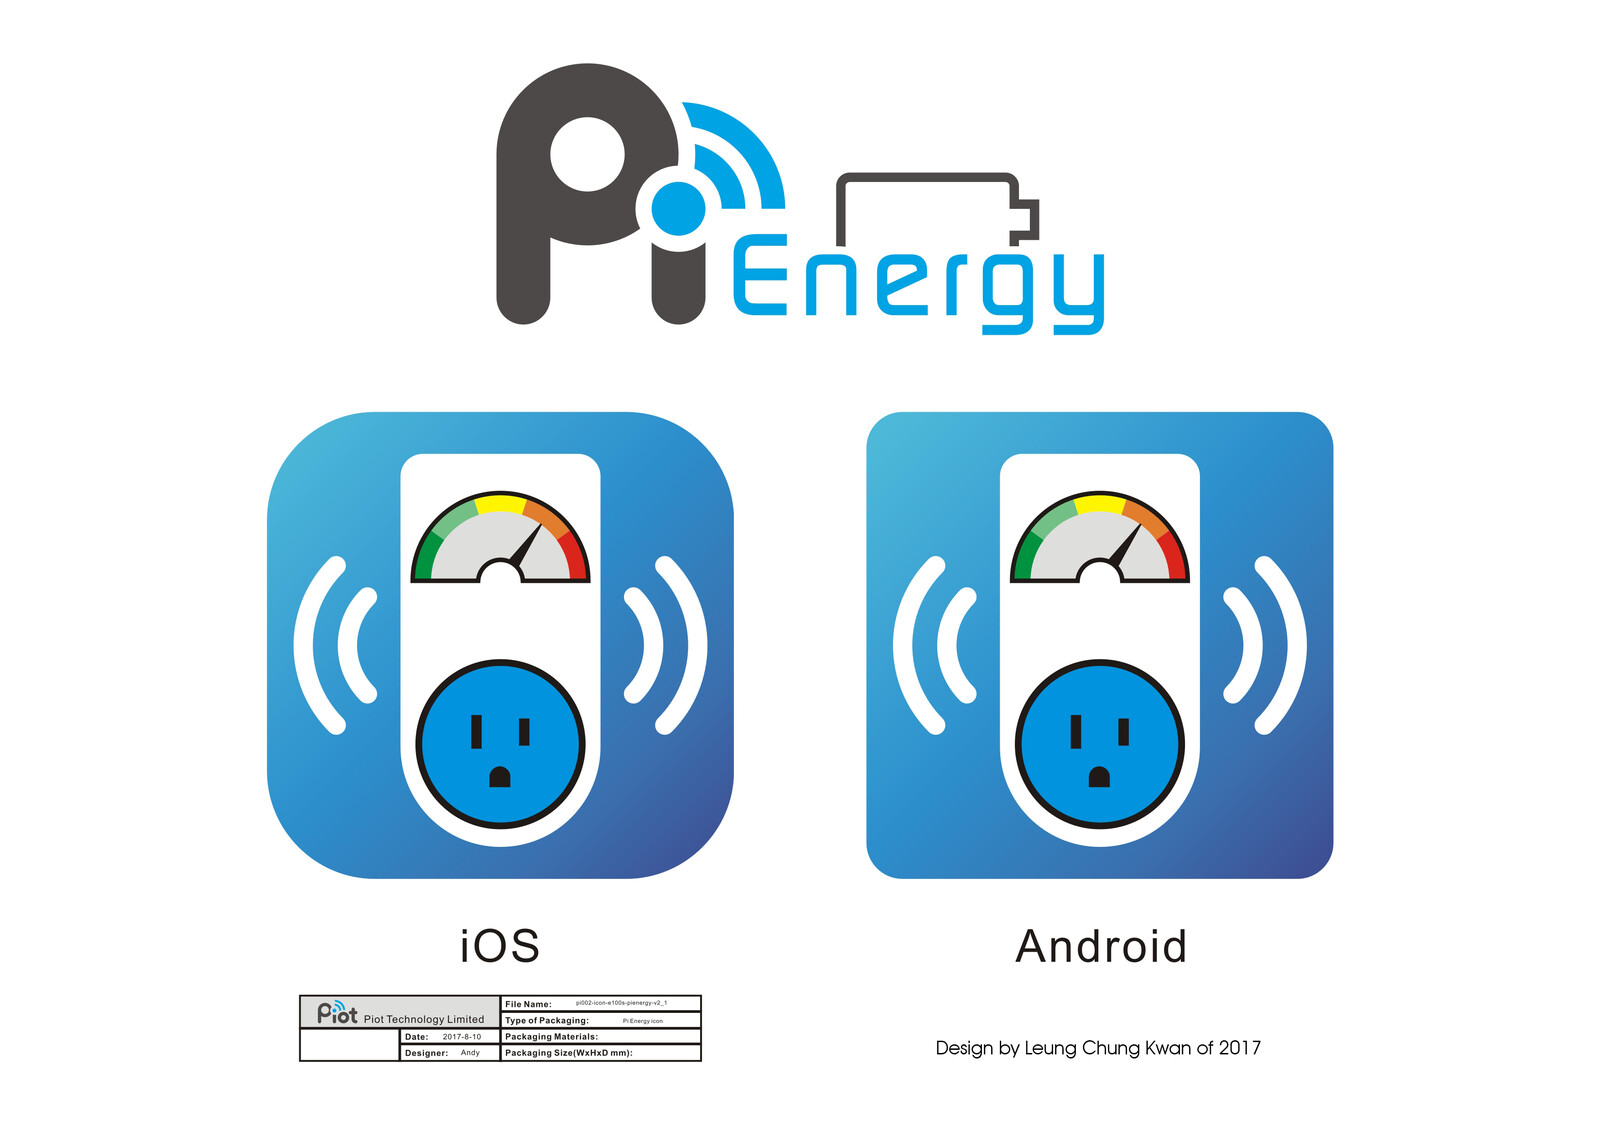 💎 App Icon | Design by Leung Chung Kwan on 2017 💎
App Name︰Pienergy | Client︰Piot Technology Limited
Android App︰https://apk.tools/details-pienergy-apk